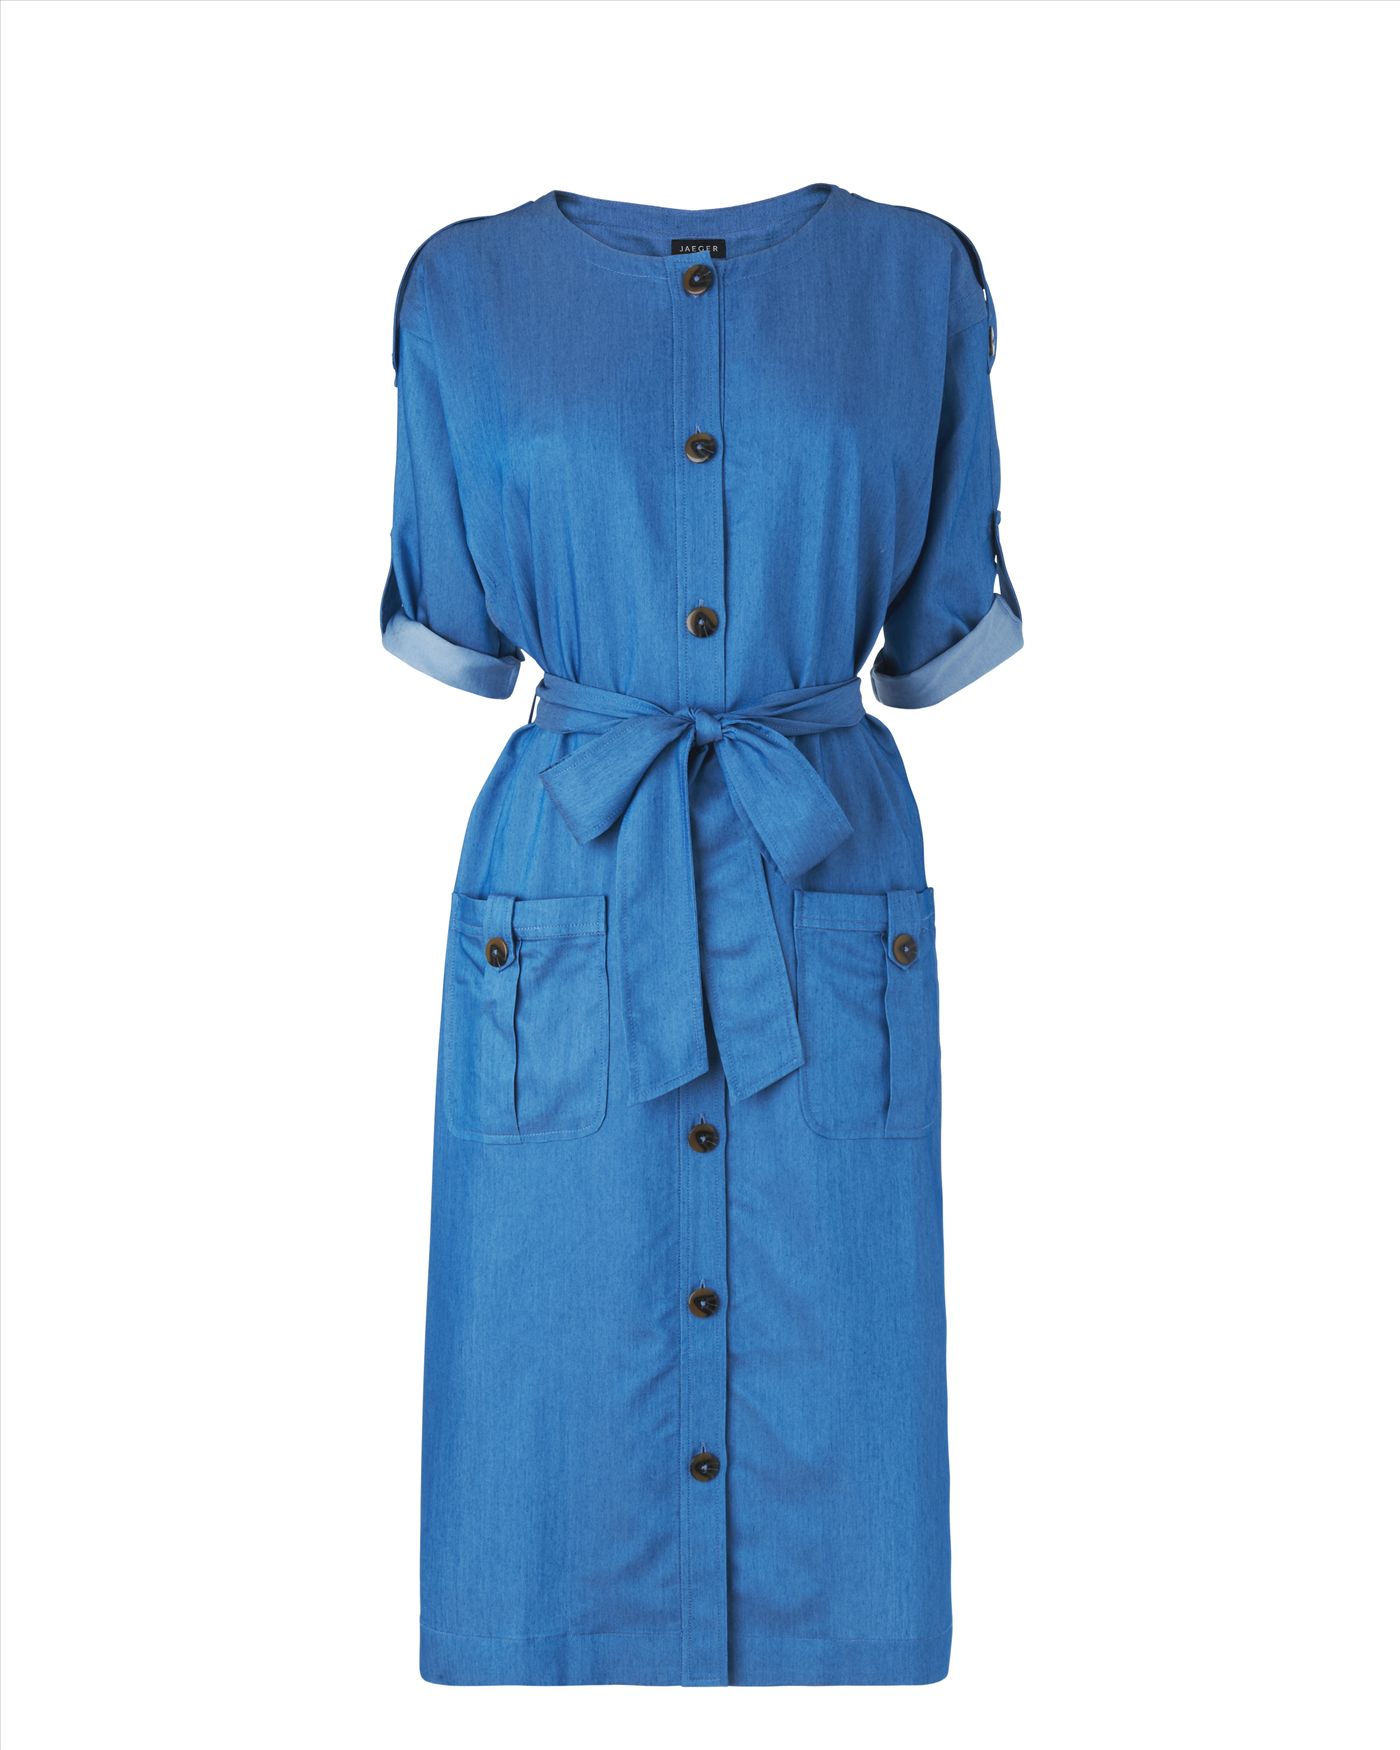 Jaeger Belted Shirt Dress in Blue (chambray) | Lyst